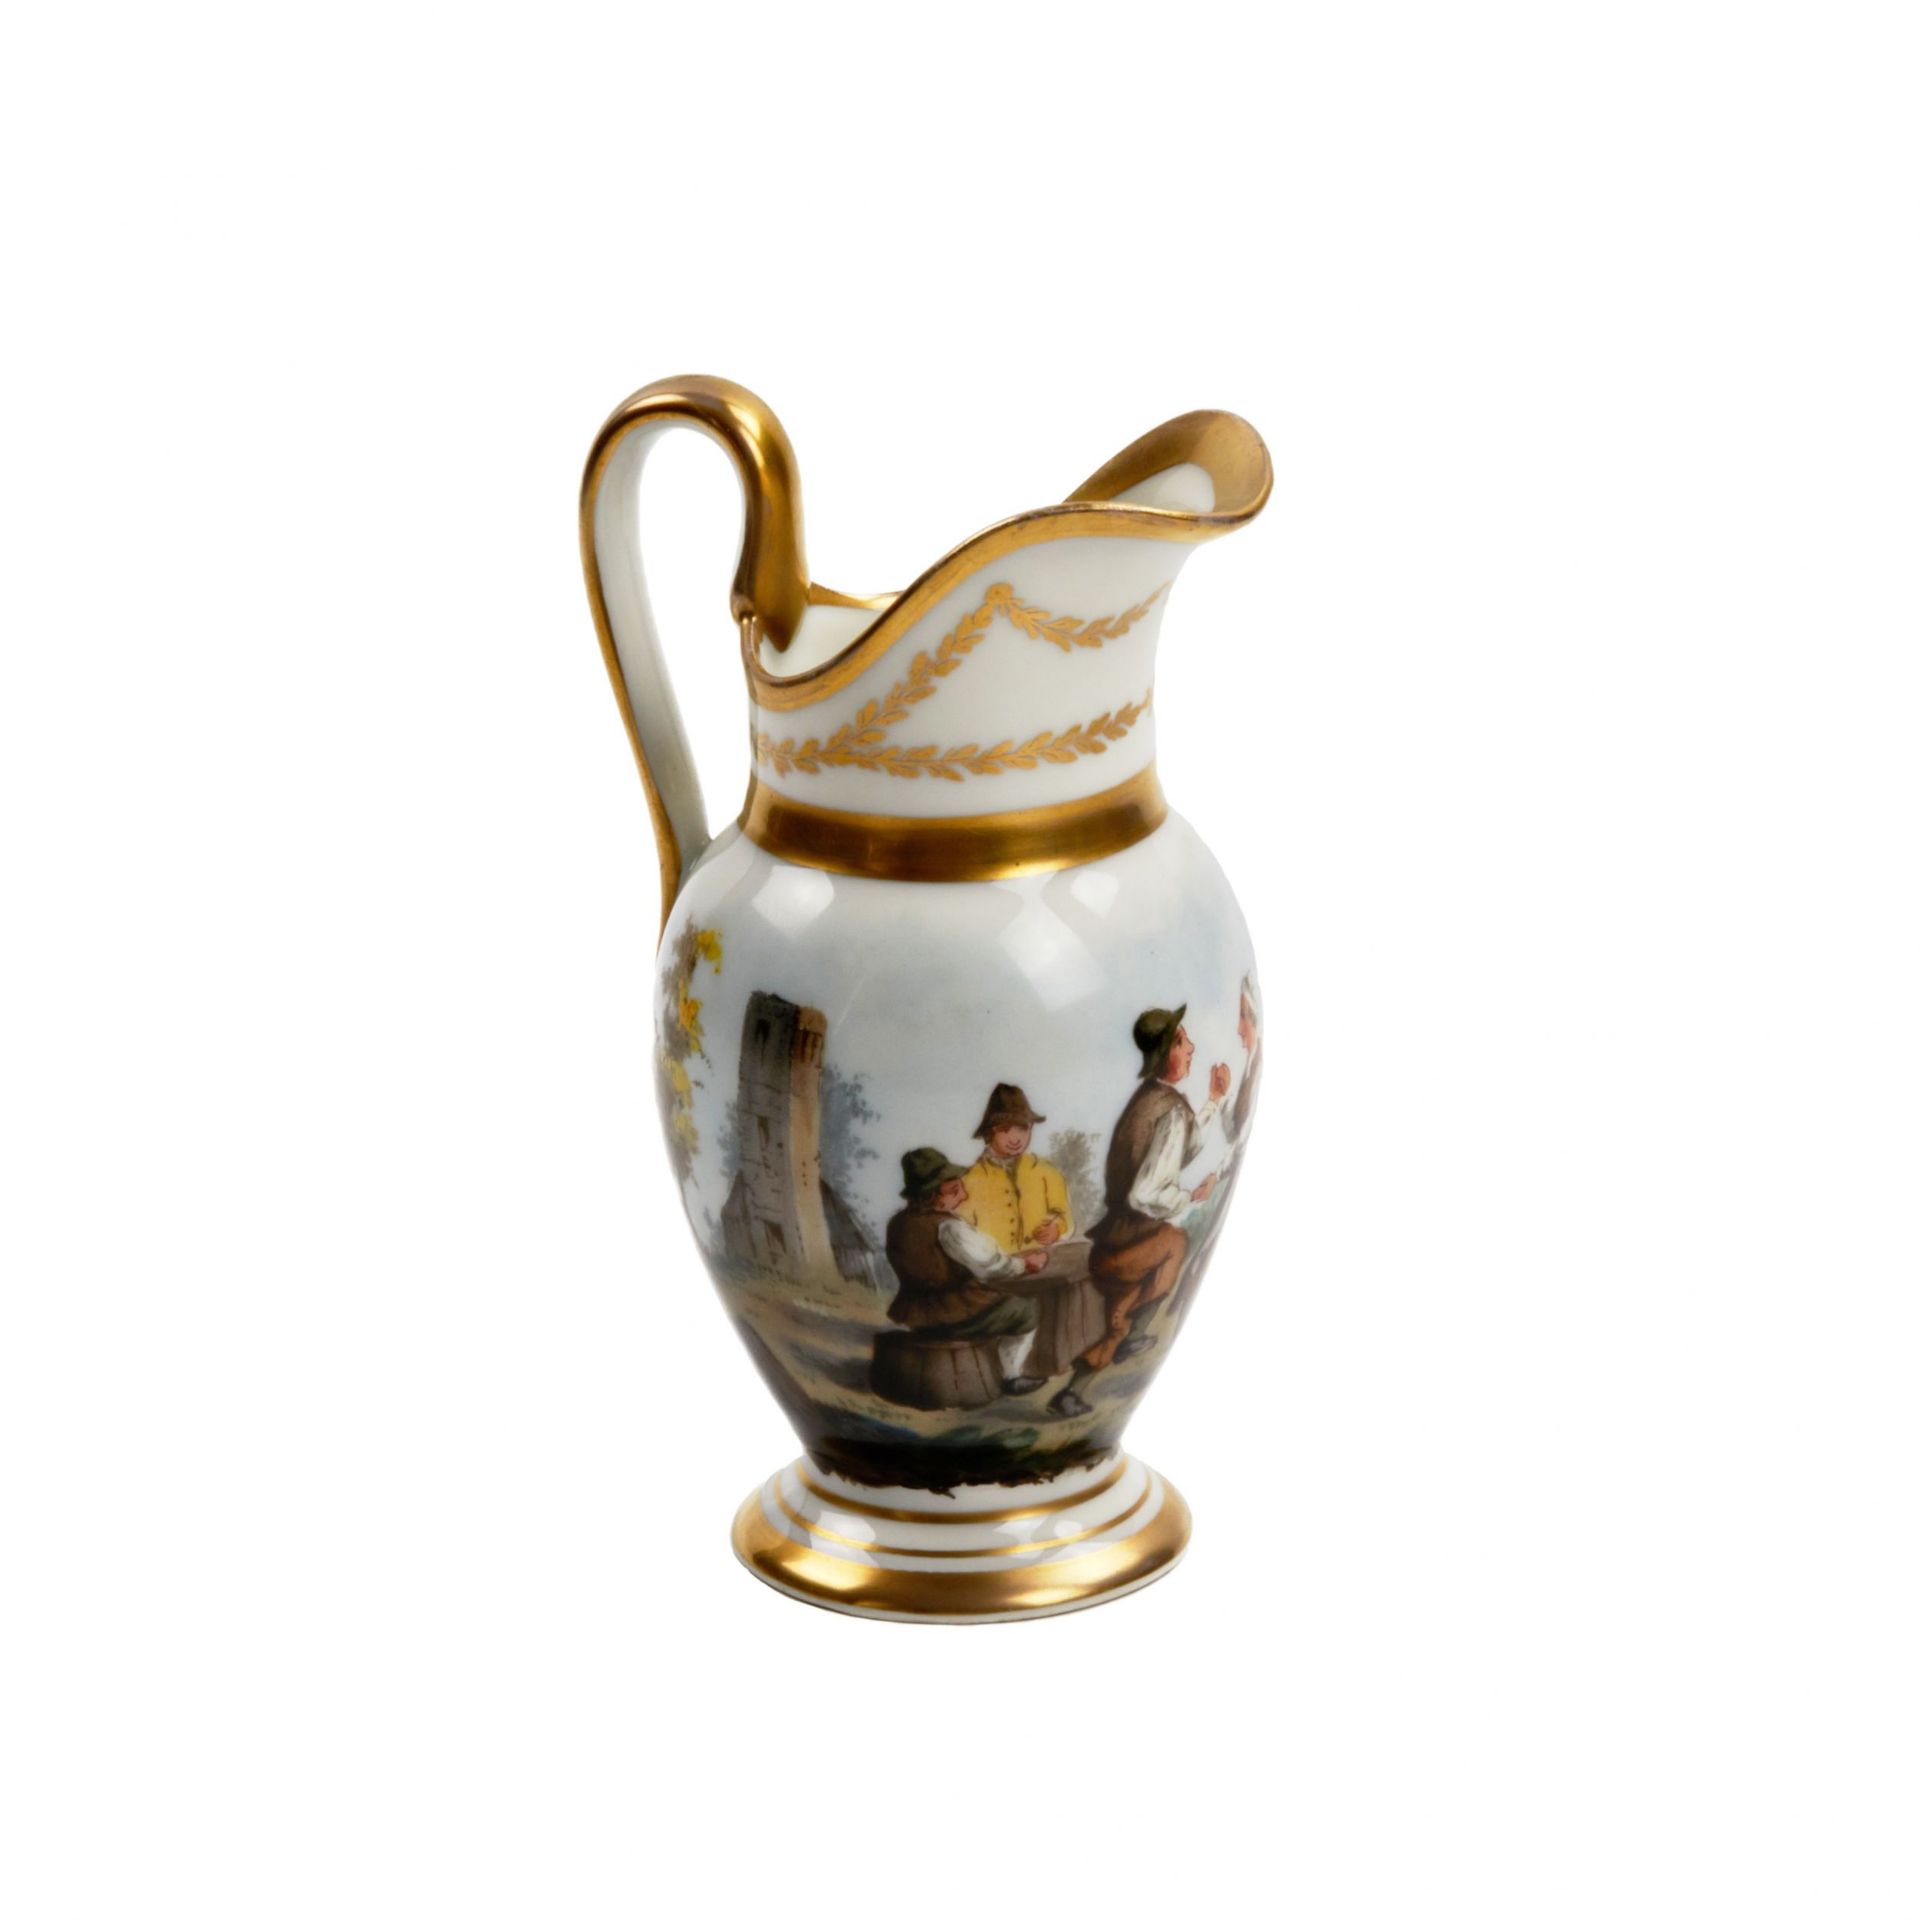 French tete-a-tete porcelain service, 19th century. - Image 7 of 19